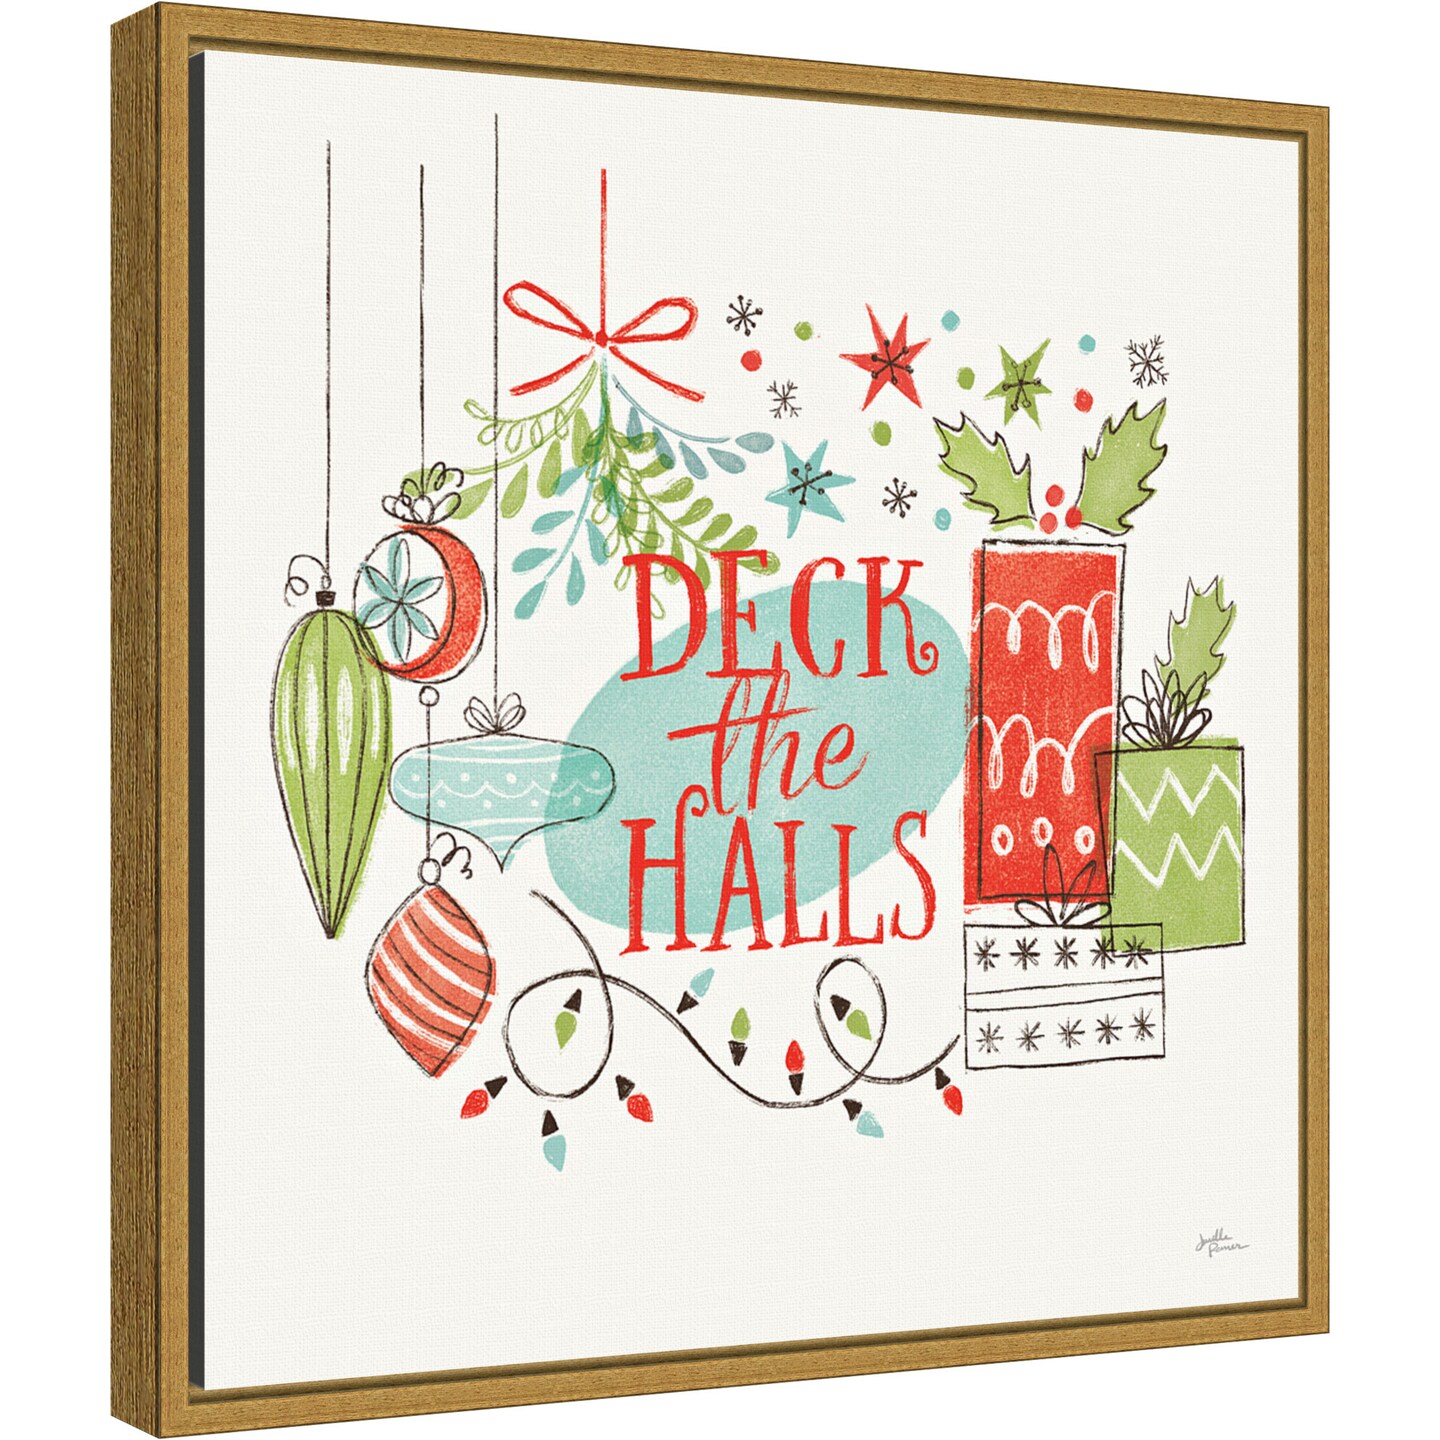 Deck the Halls Christmas Holly by Janelle Penner 16-in. W x 16-in. H. Canvas Wall Art Print Framed in Gold